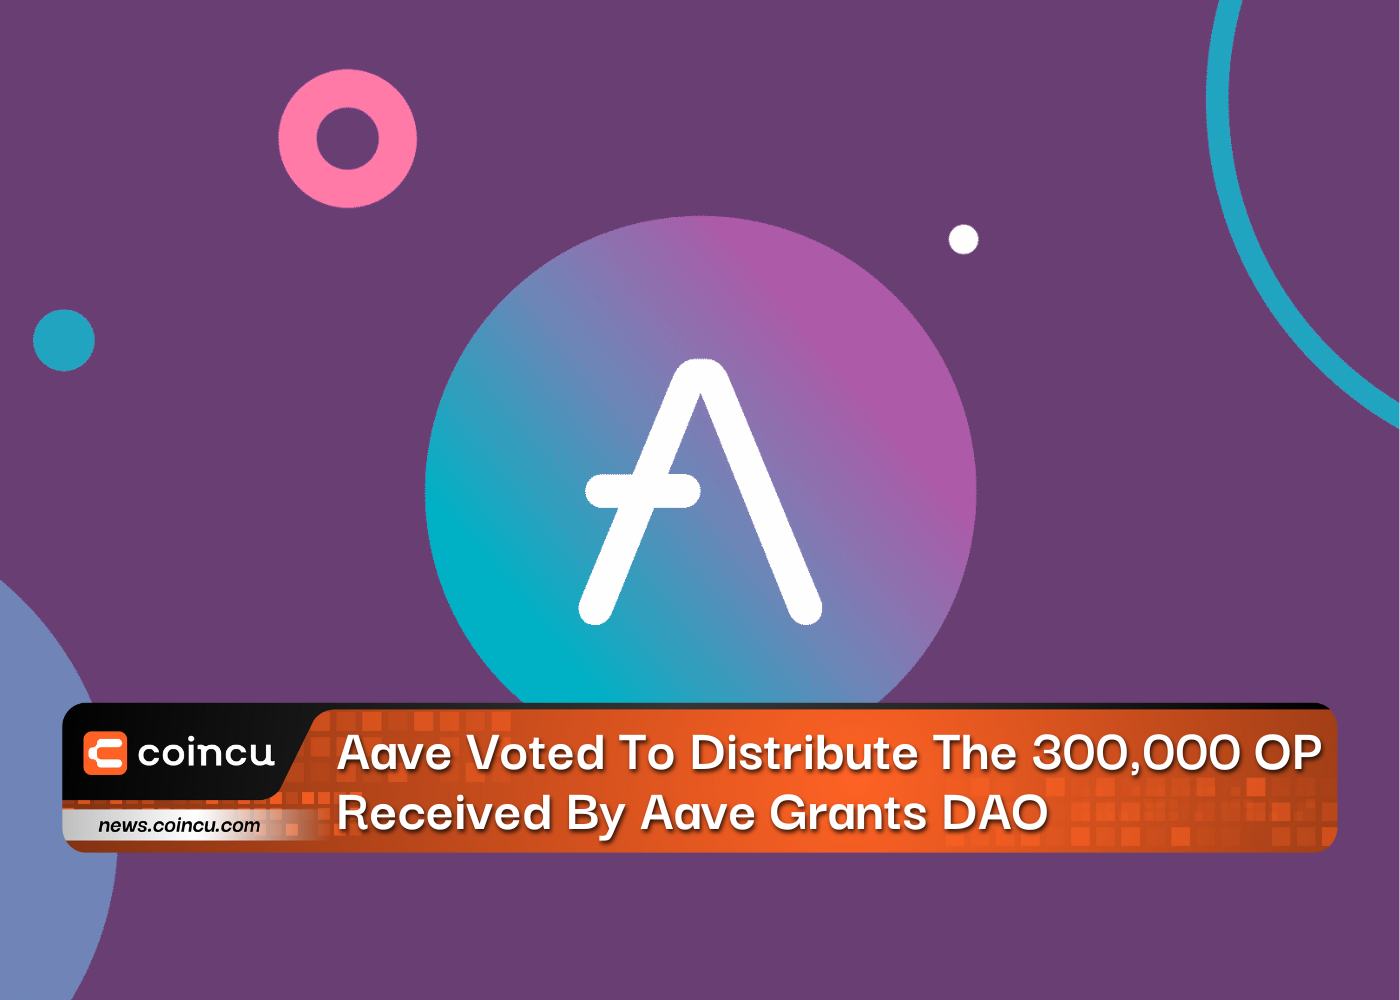 Aave Voted To Distribute The 300,000 OP Received By Aave Grants DAO